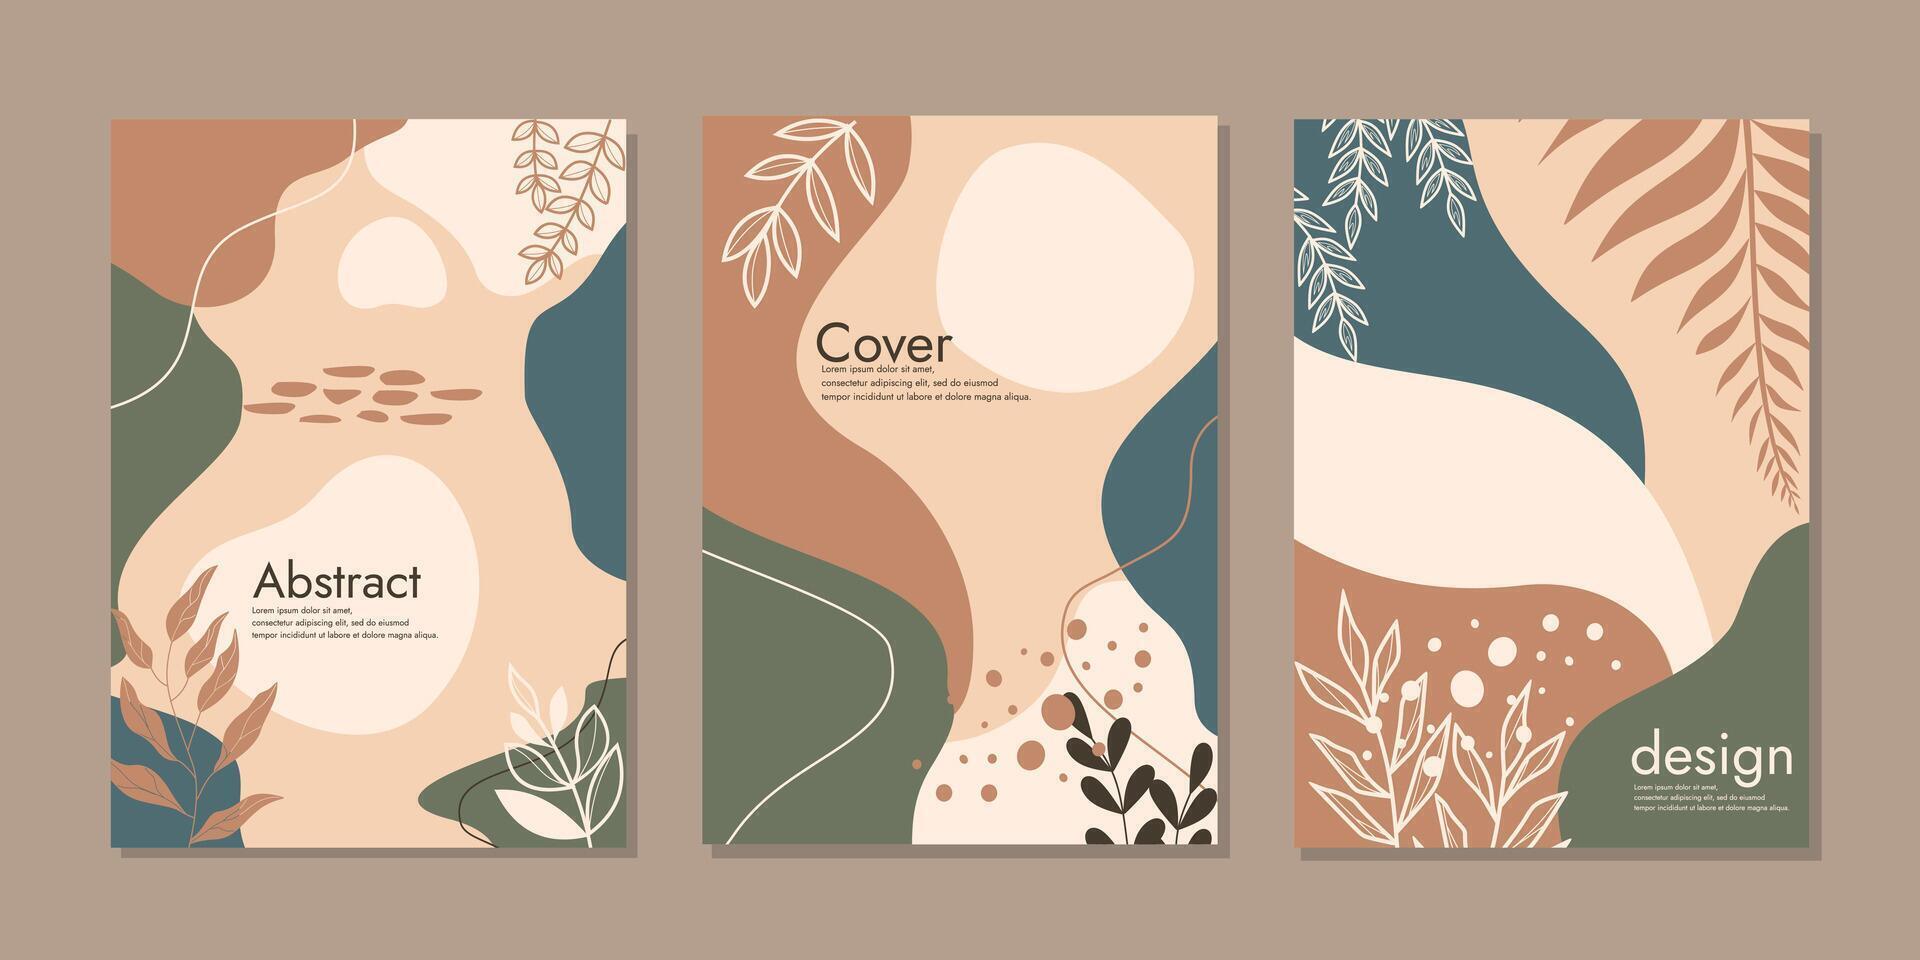 Trendy covers set. Cool abstract and floral design. A4 size book cover template for annual report, magazine, booklet, proposal, portfolio, brochure, poster vector